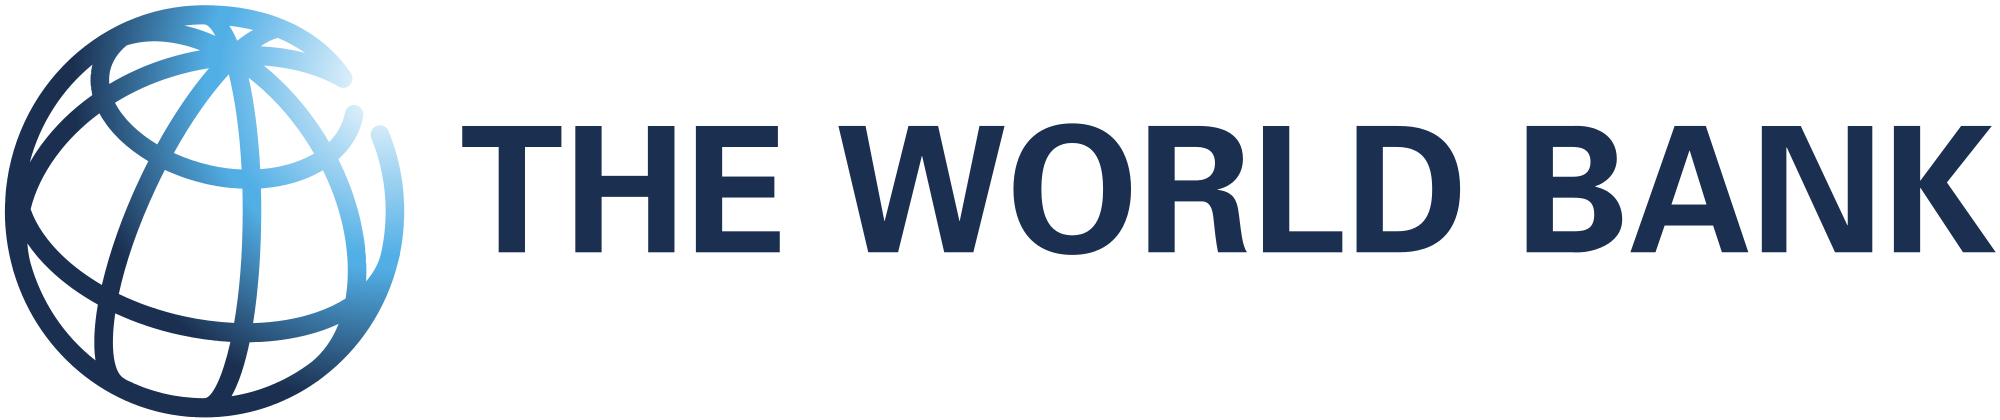 The_World_Bank_标志.svg.png